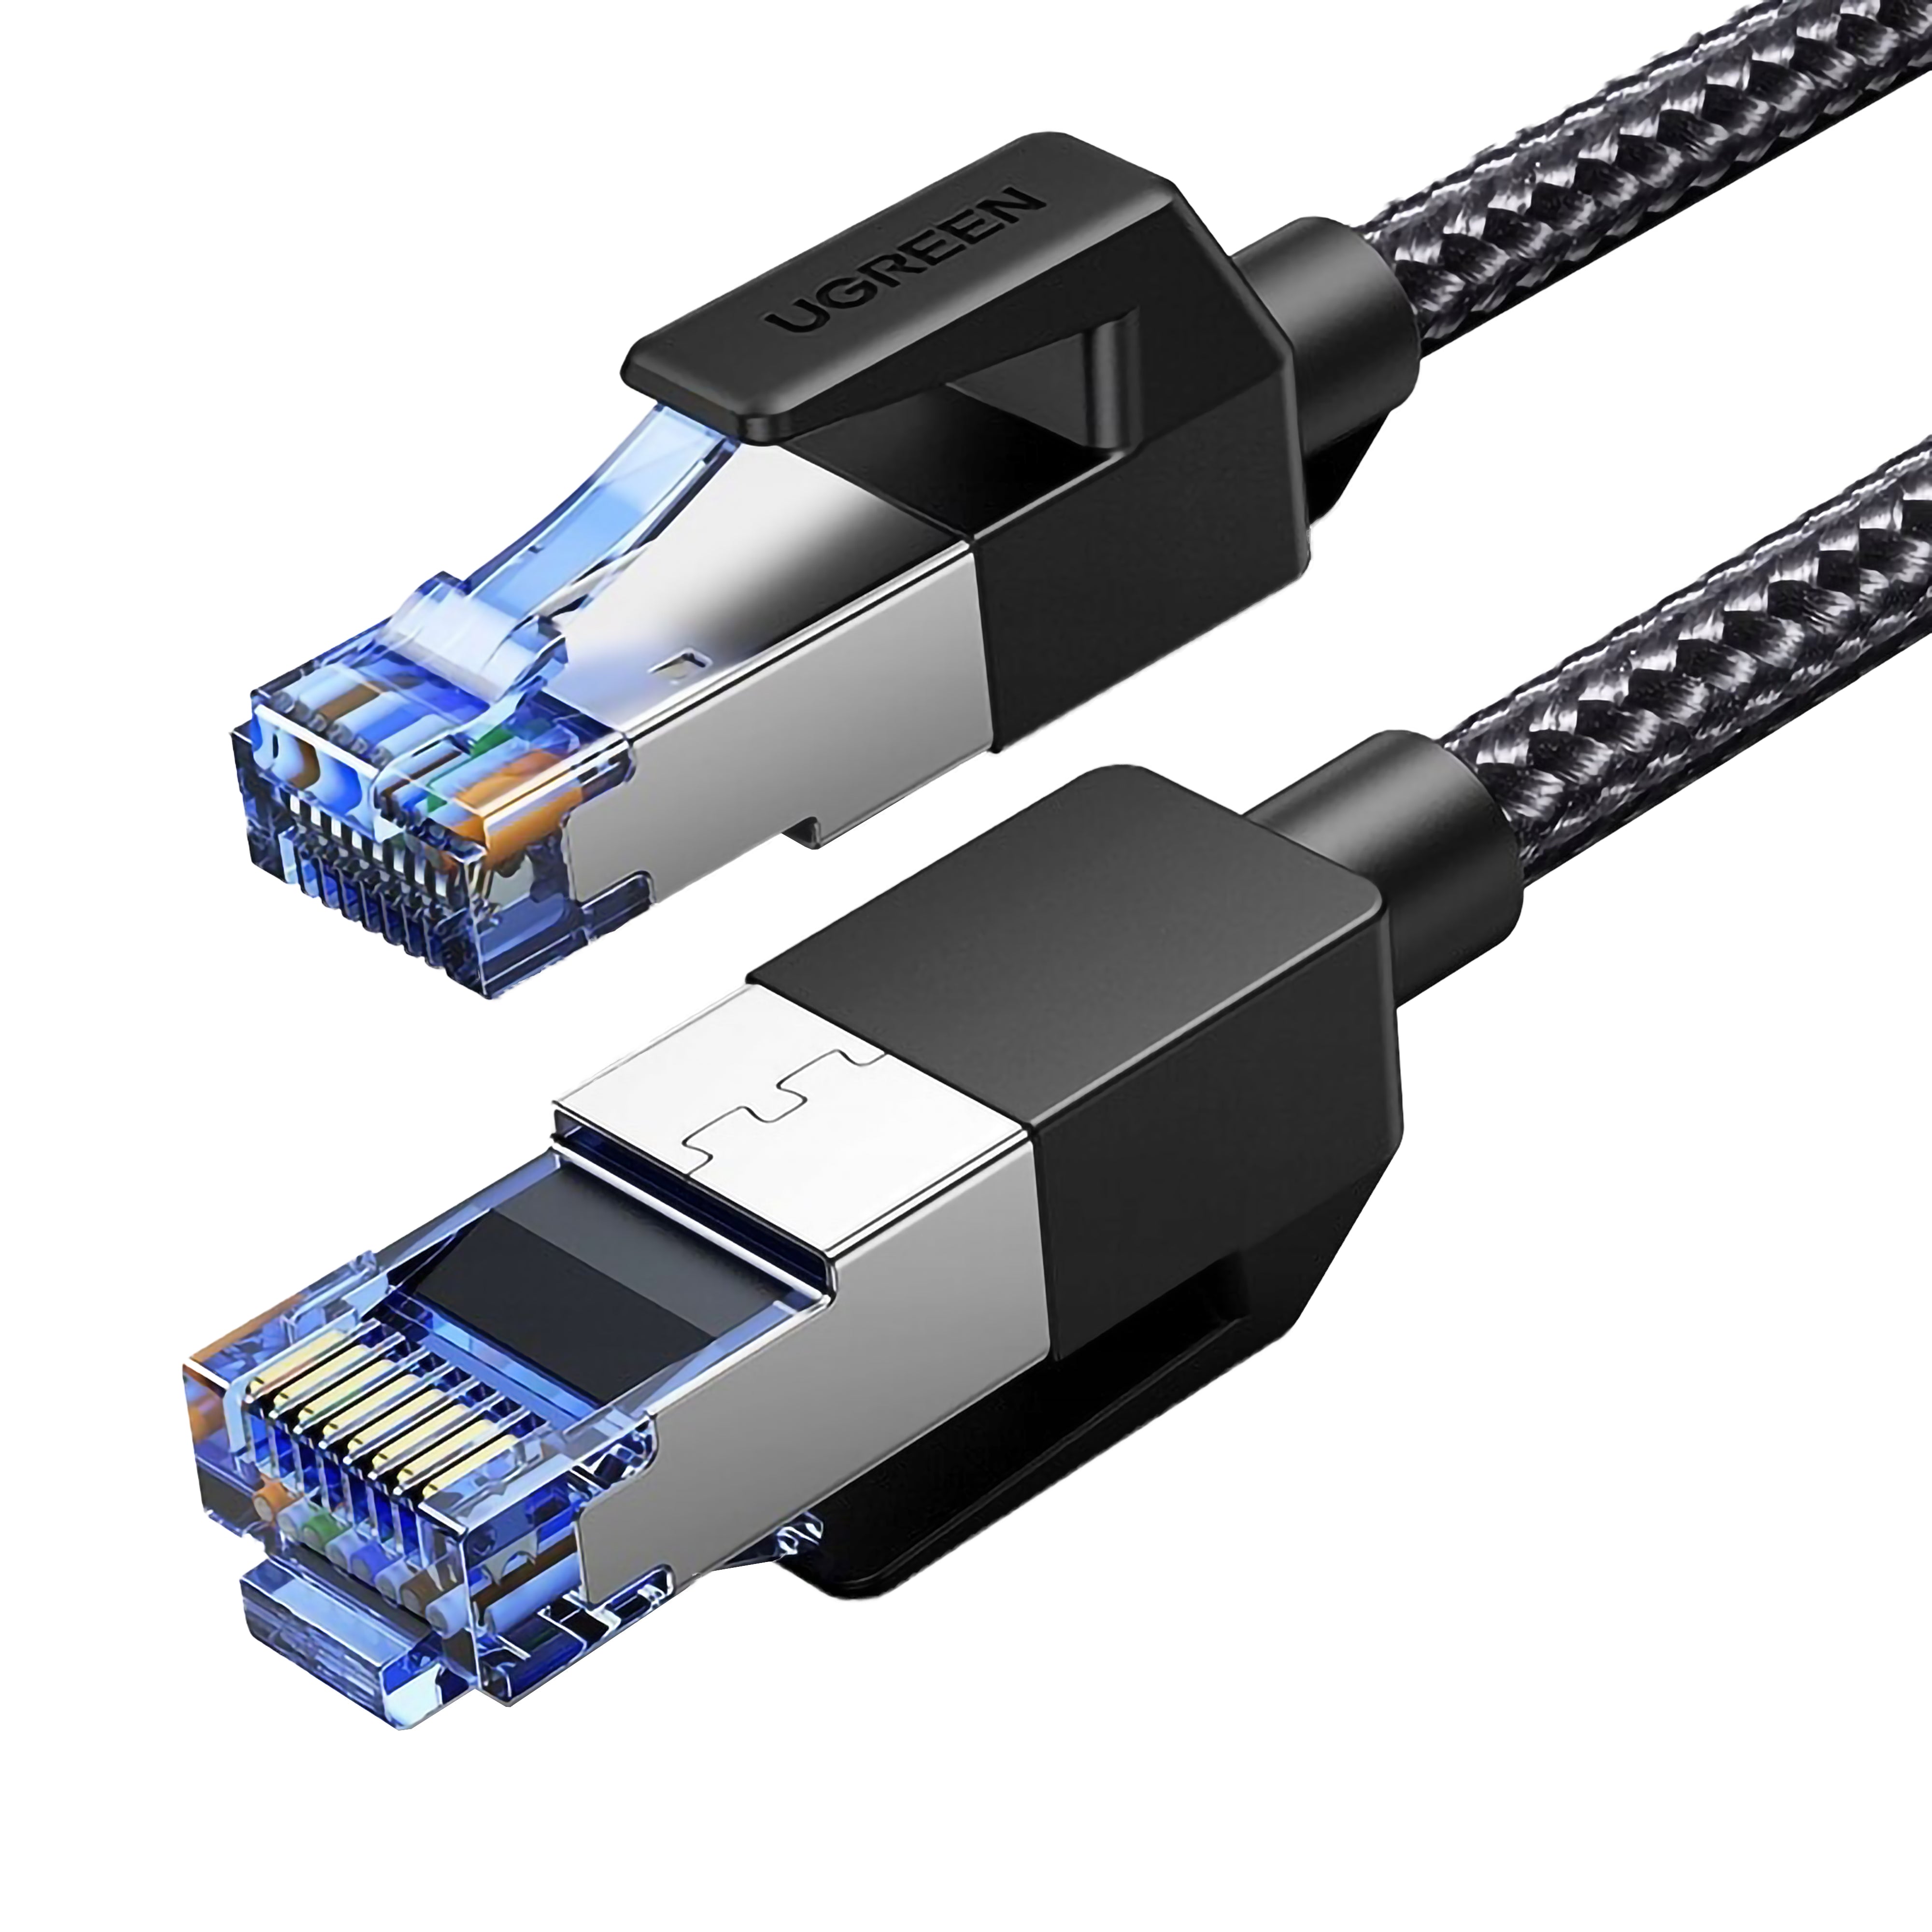 What Is a Cat 8 Ethernet Cable